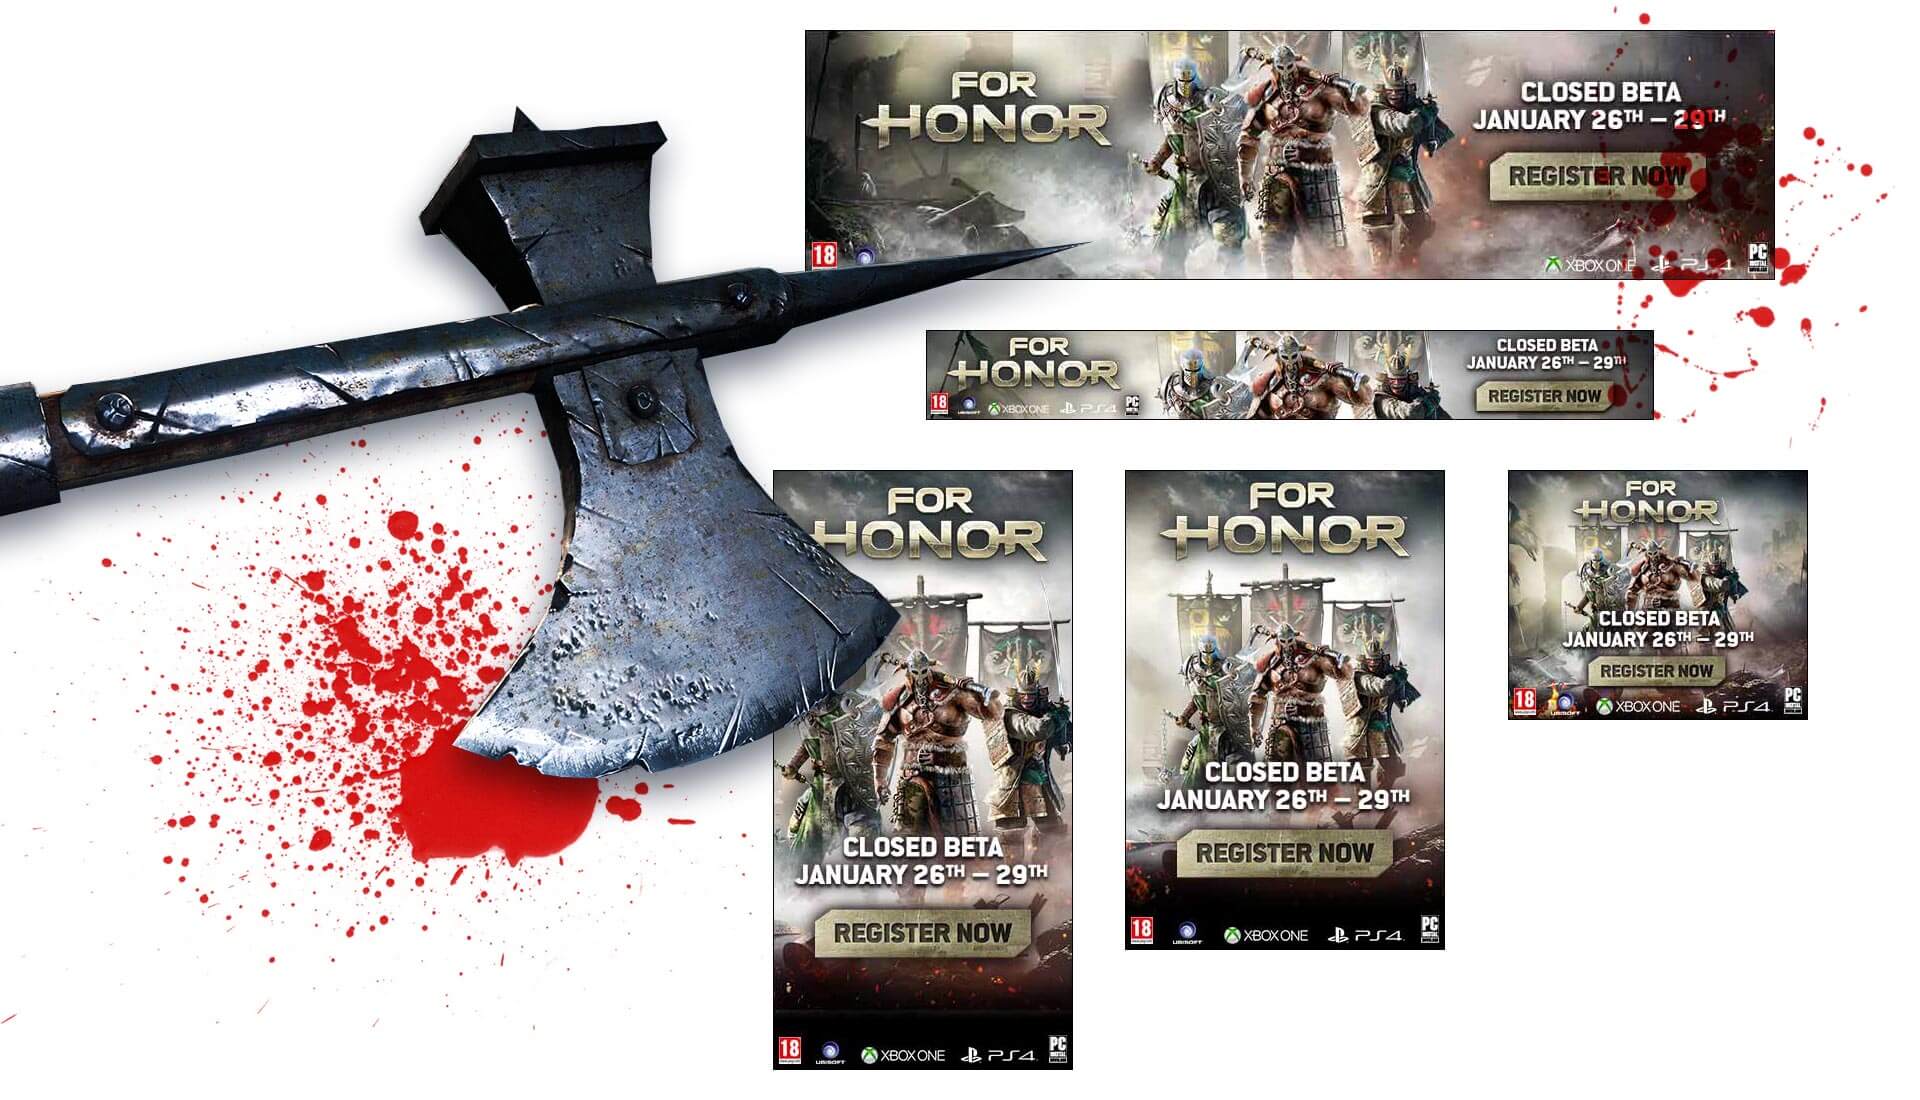 For Honor - Online Advertising image